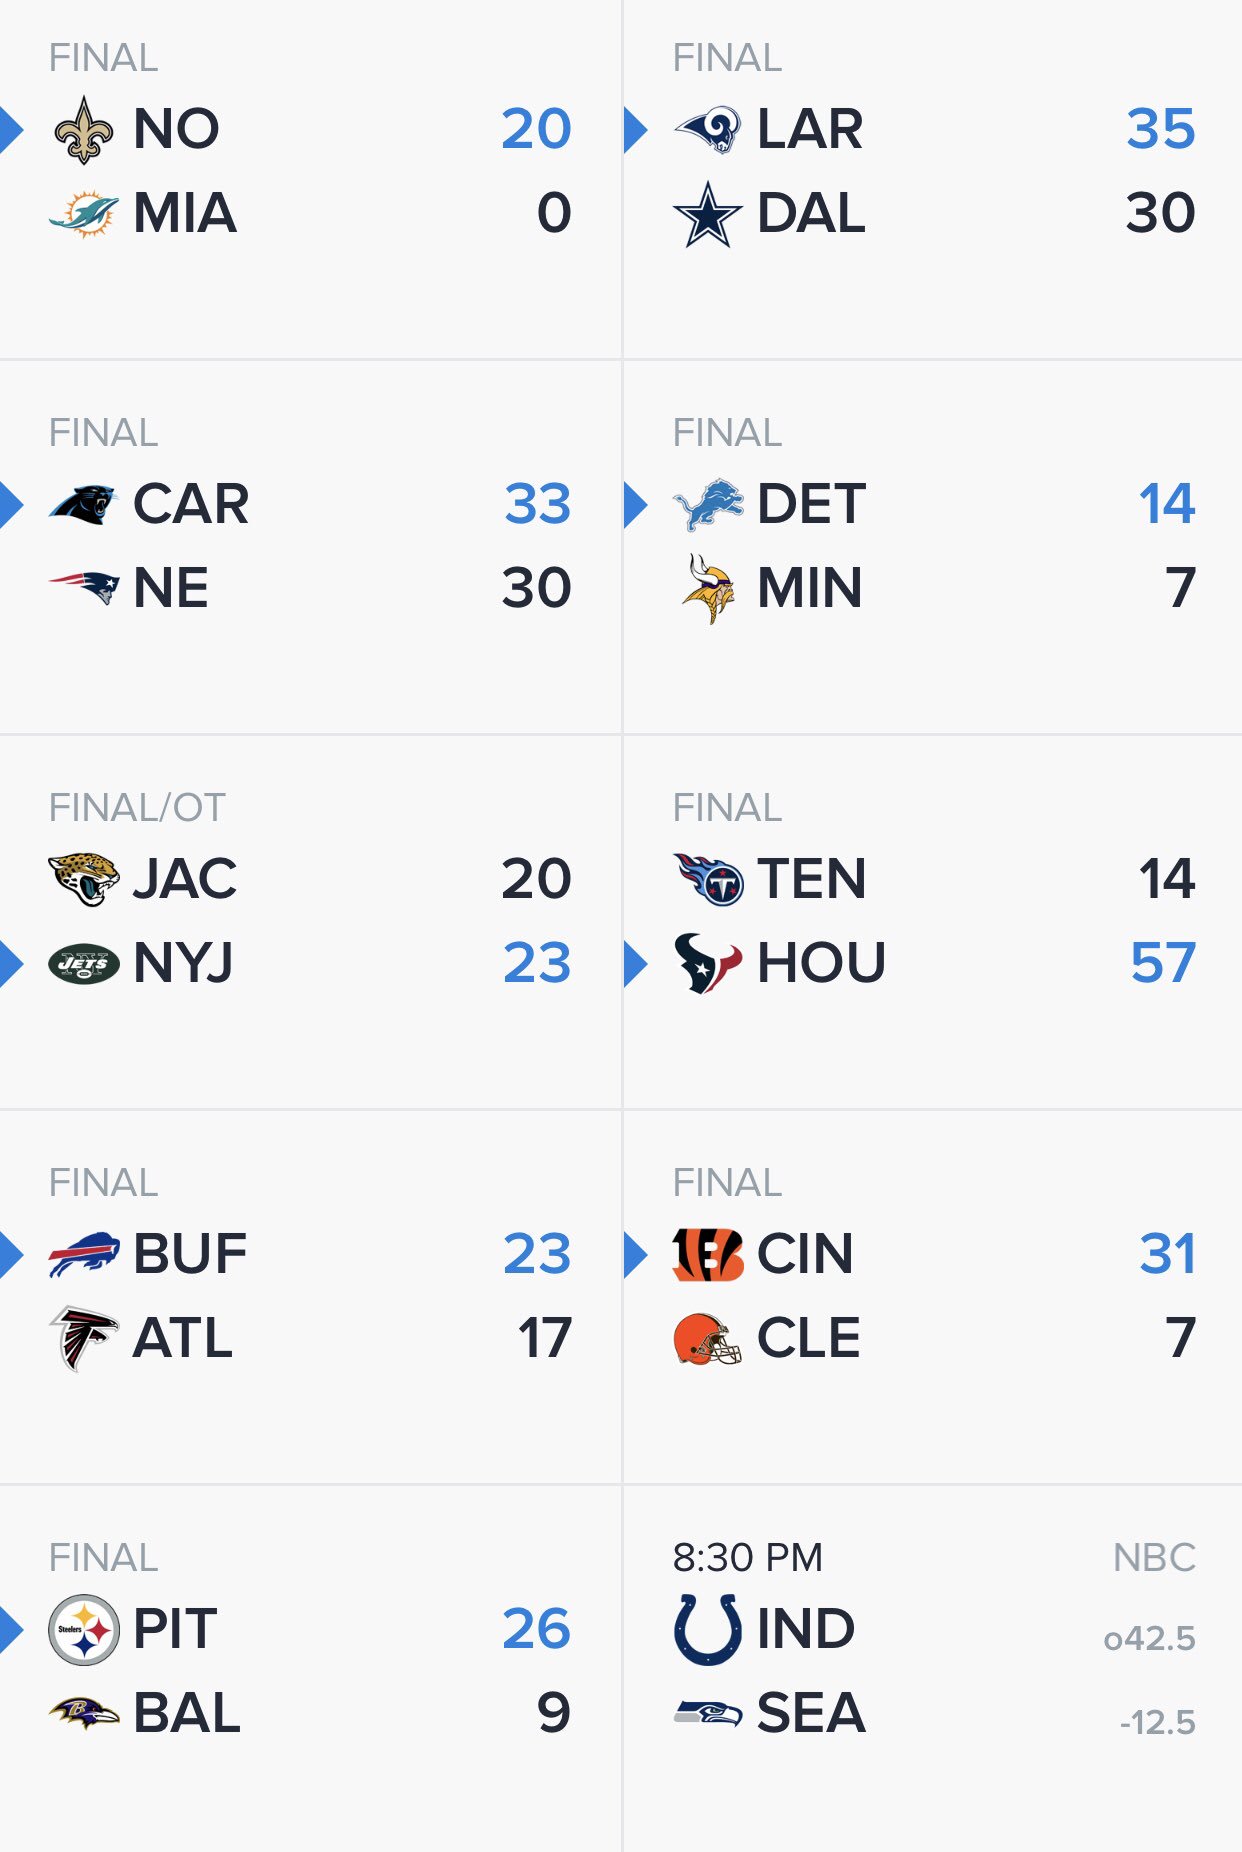 google give me all the nfl scores for today